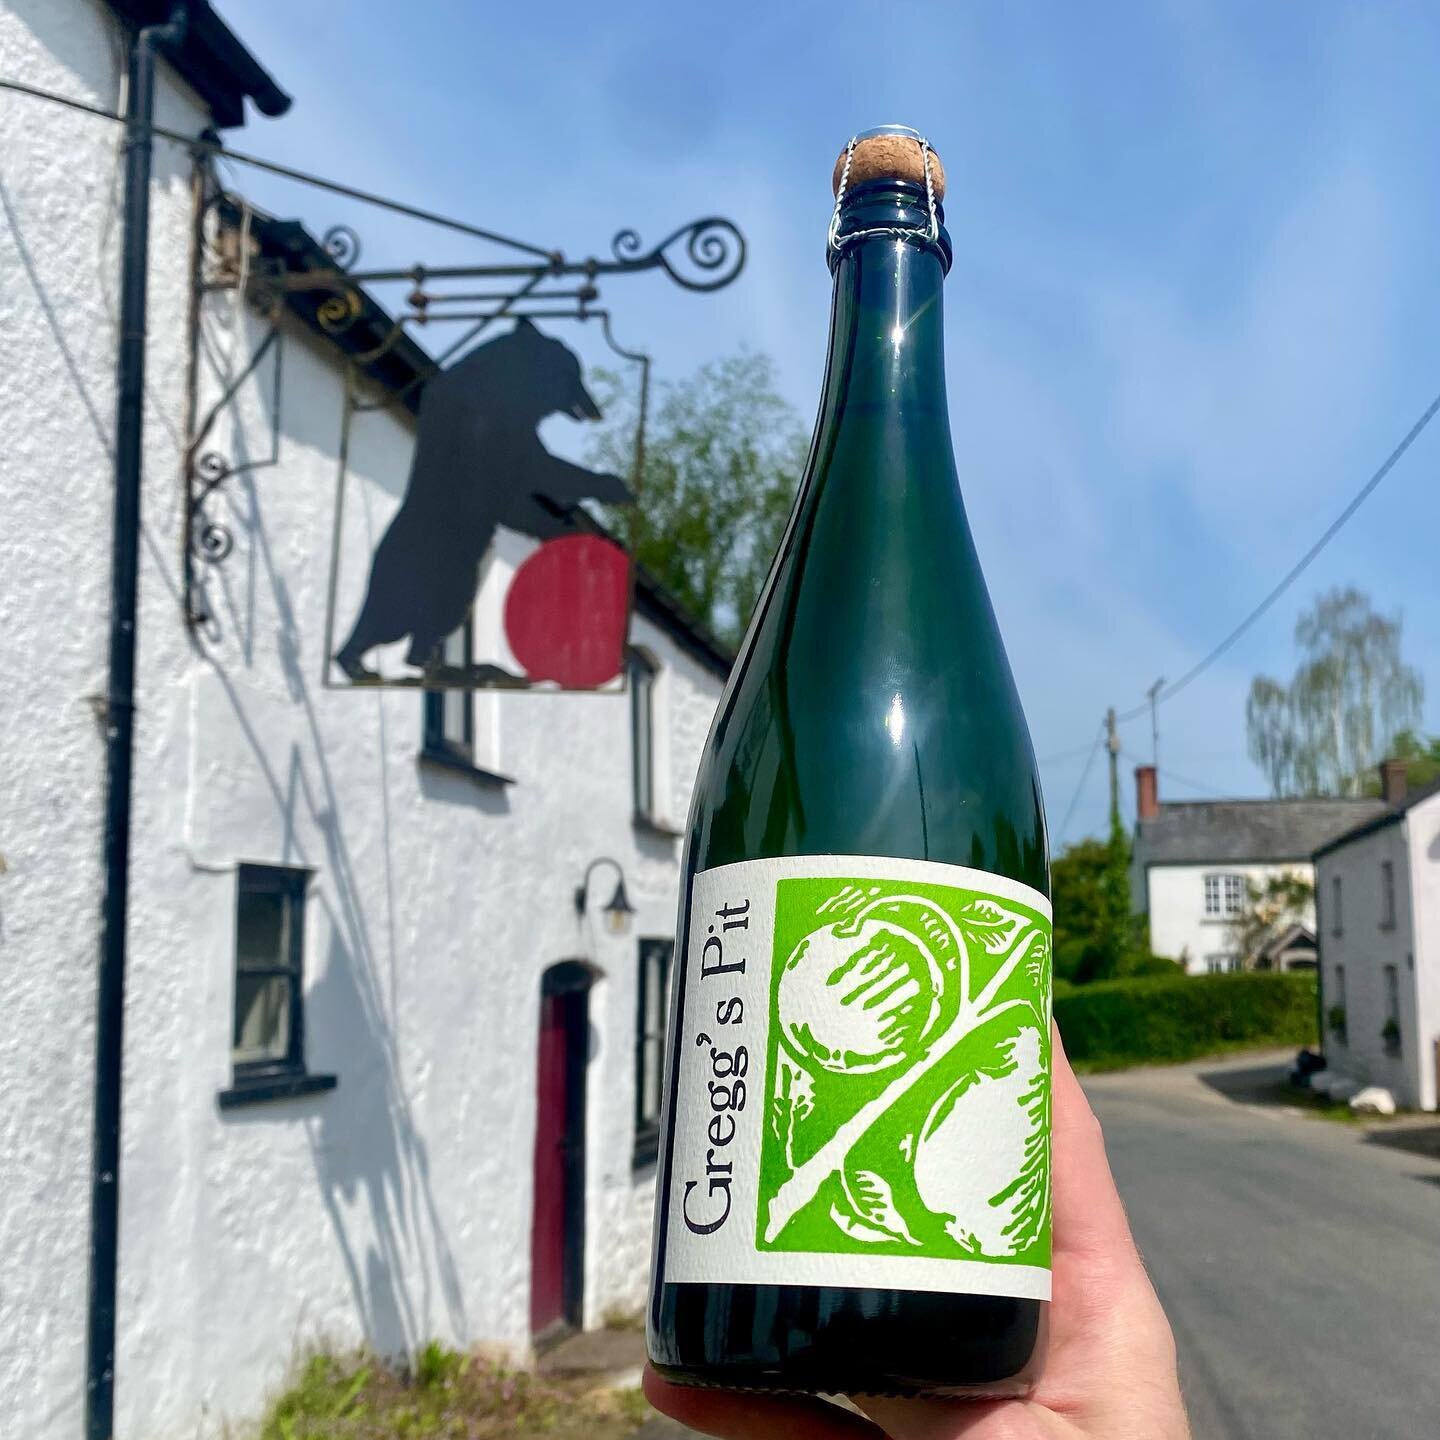 ☀️It&rsquo;s Friday and the sun is out, well, it&rsquo;s not raining anyway ☀️ So we&rsquo;re popping bottles! Along side the usual stellar selection of fizz, ros&eacute;, red and white wine we&rsquo;ll be pouring this delightful Perry by the glass f